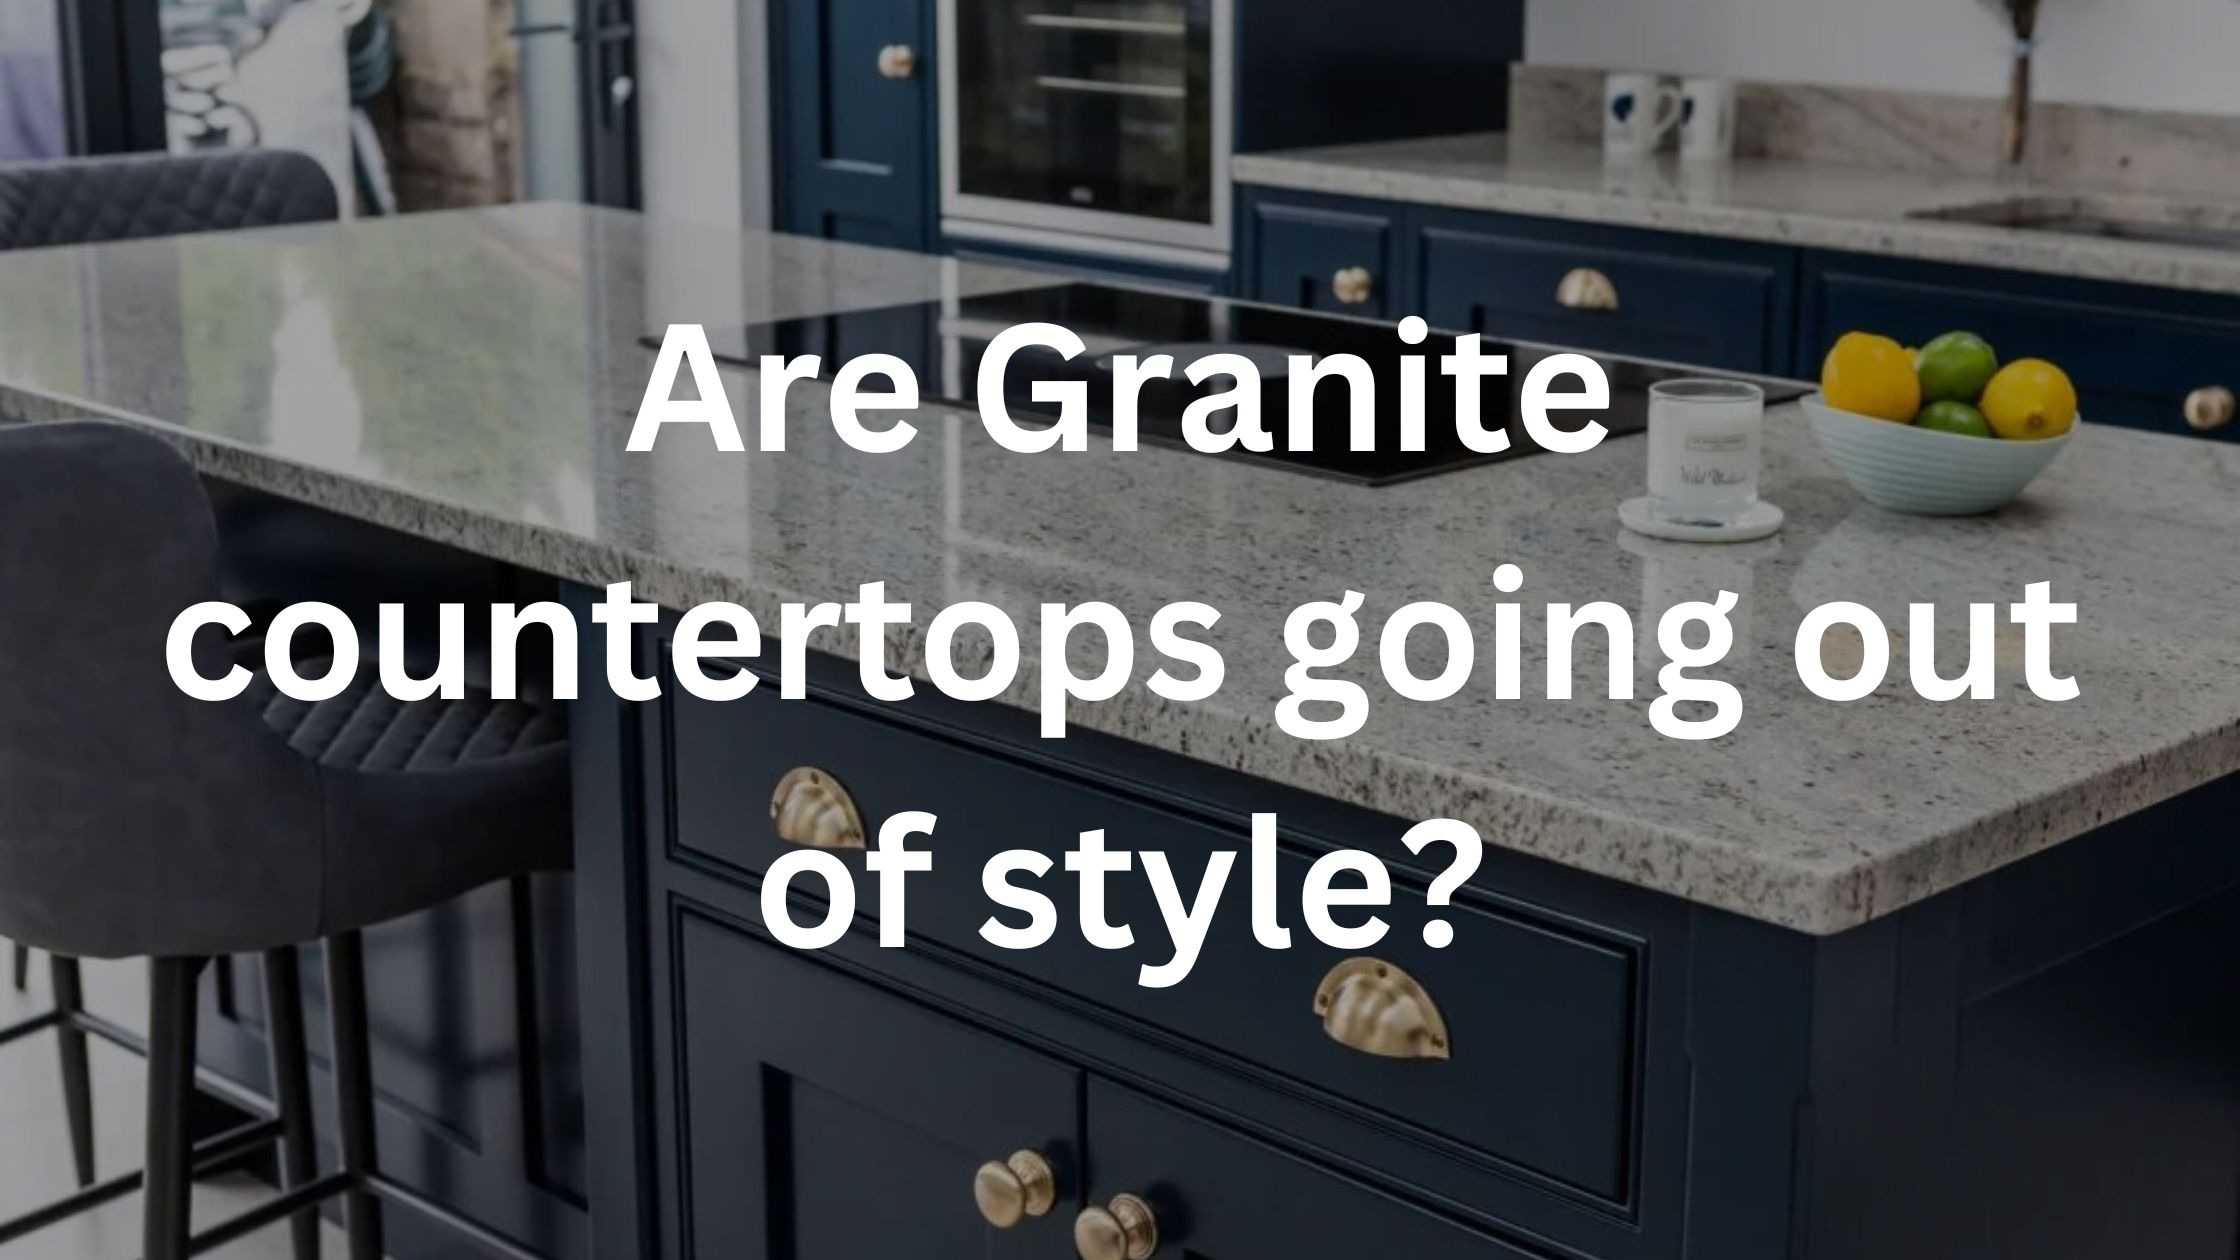 Are granite countertops going out of style?